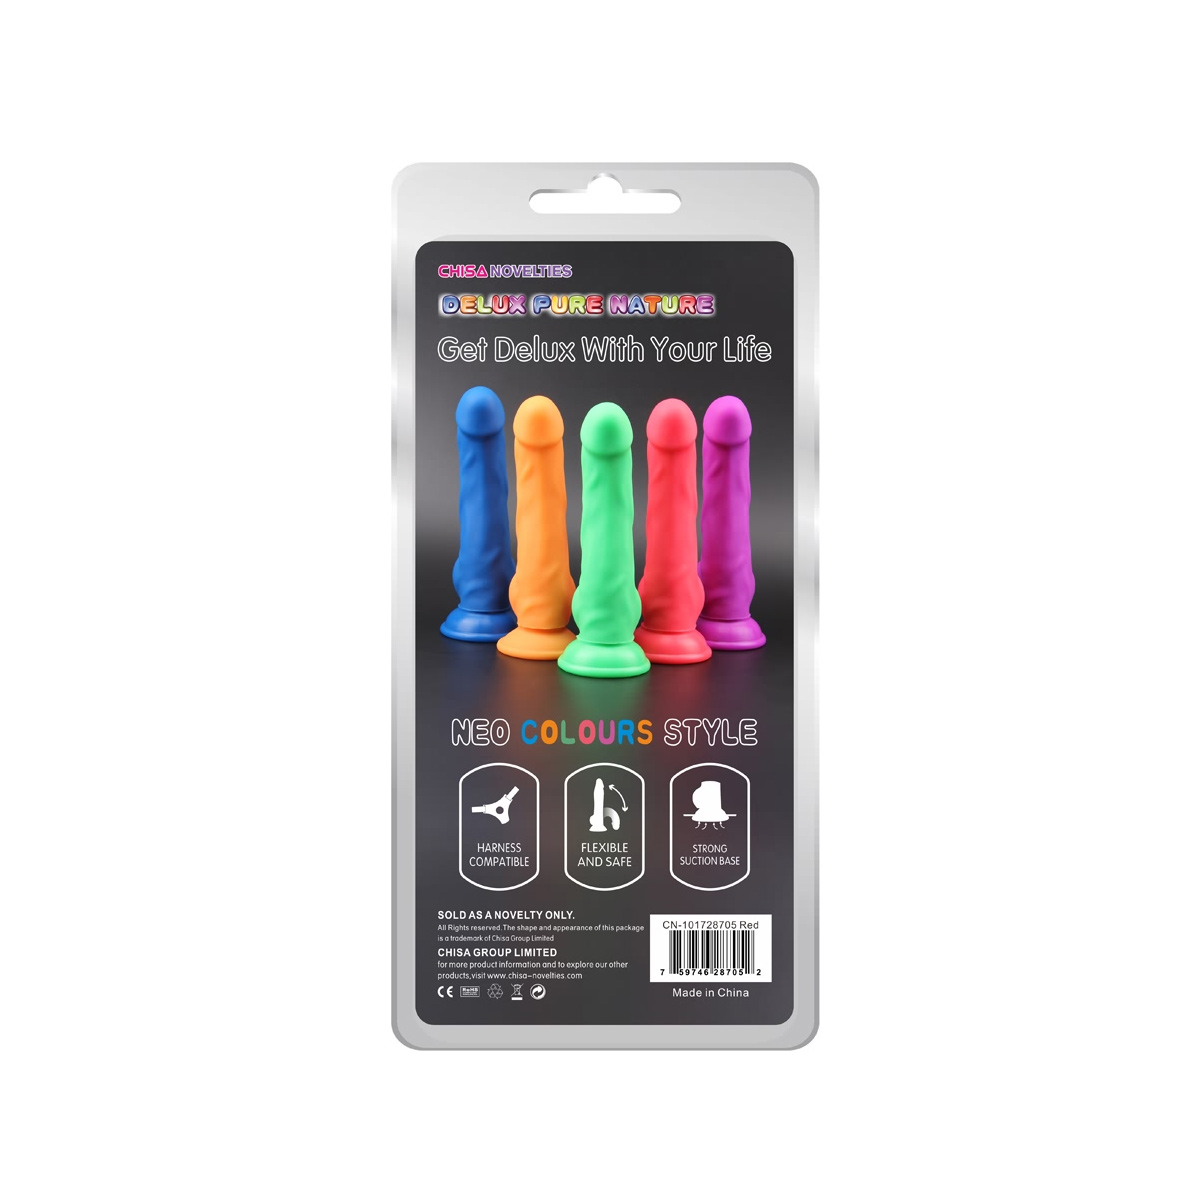 Red-Dildo-Deluxe-01-OPR-2980098-1